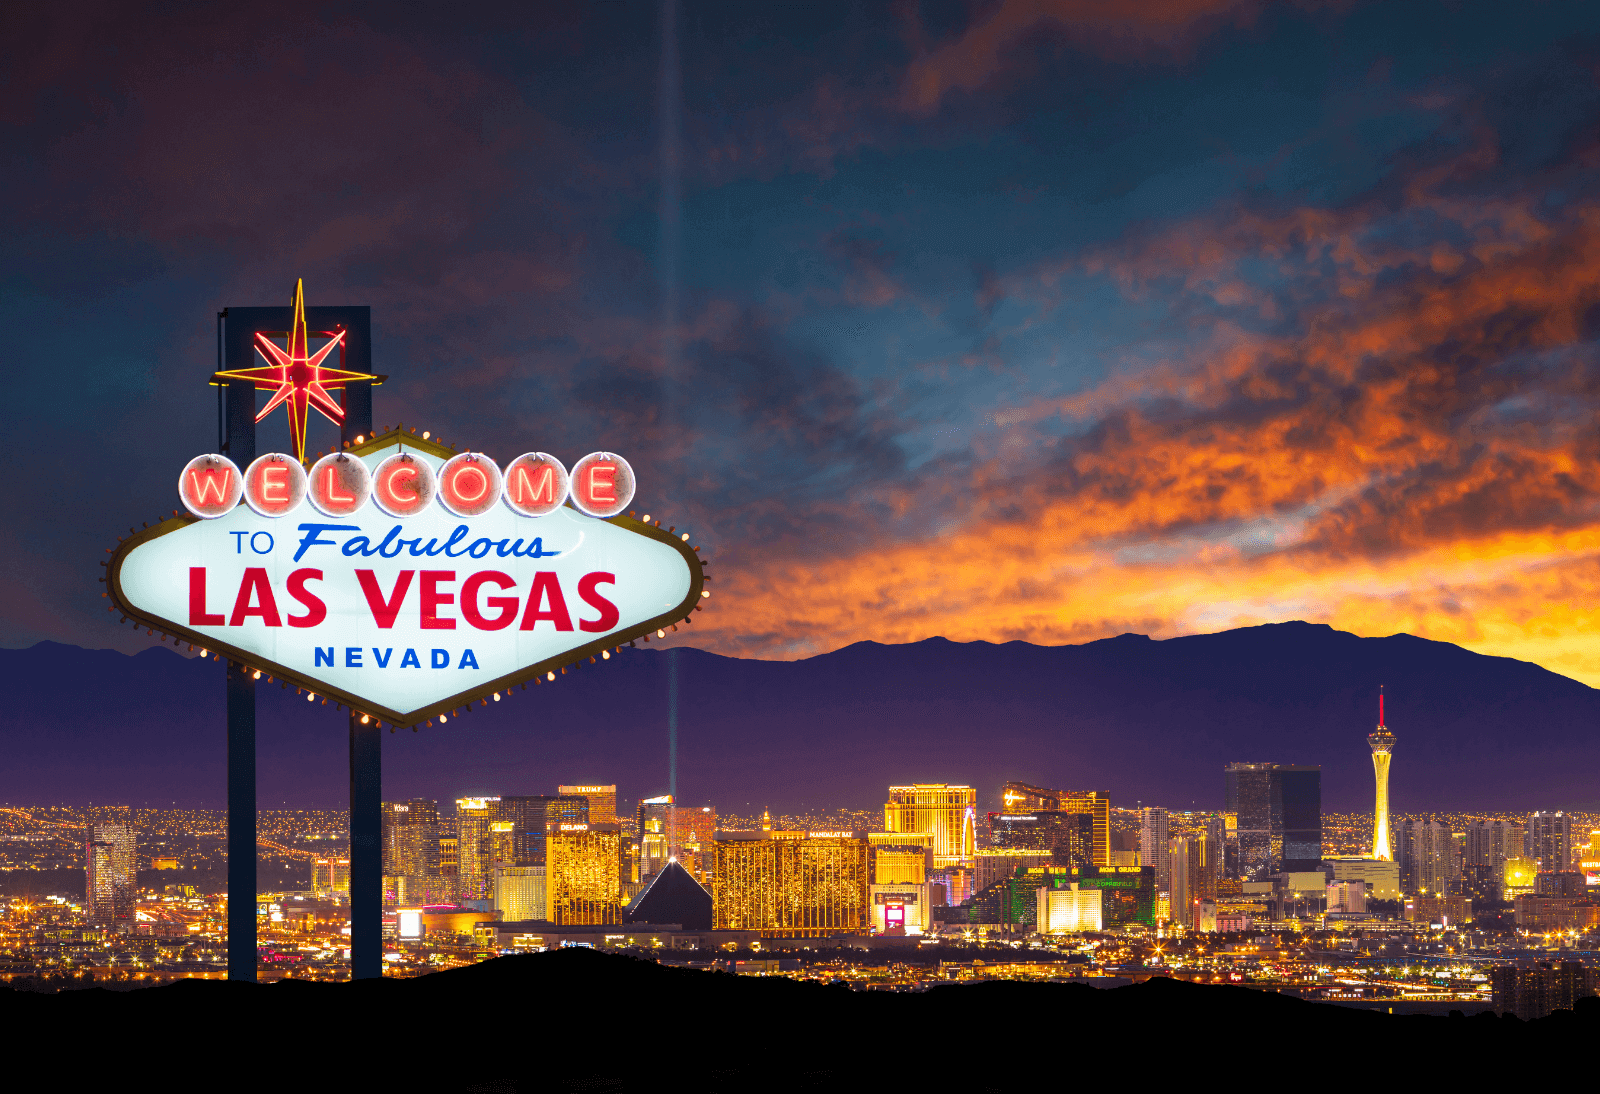 grab free flights to las vegas using points and miles